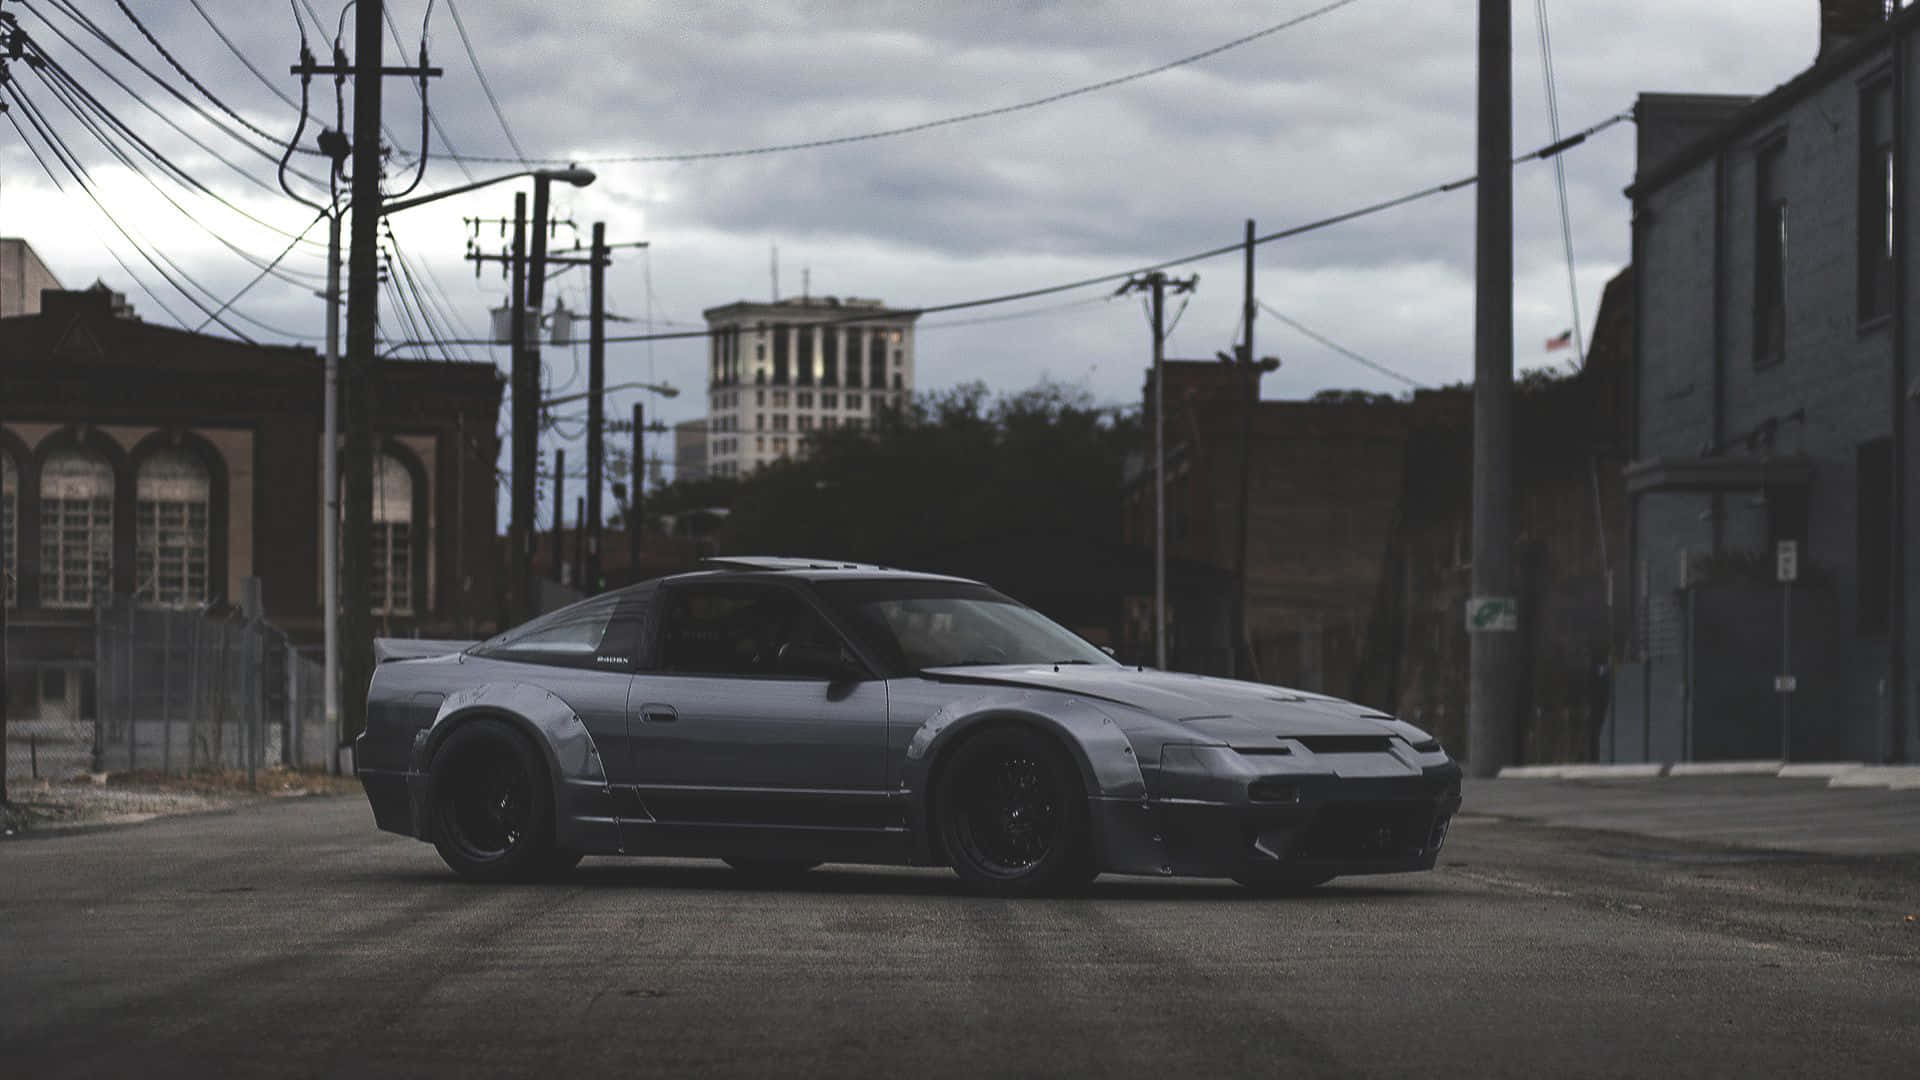 Nissan Silvia S13 in White Racing Style Wallpaper